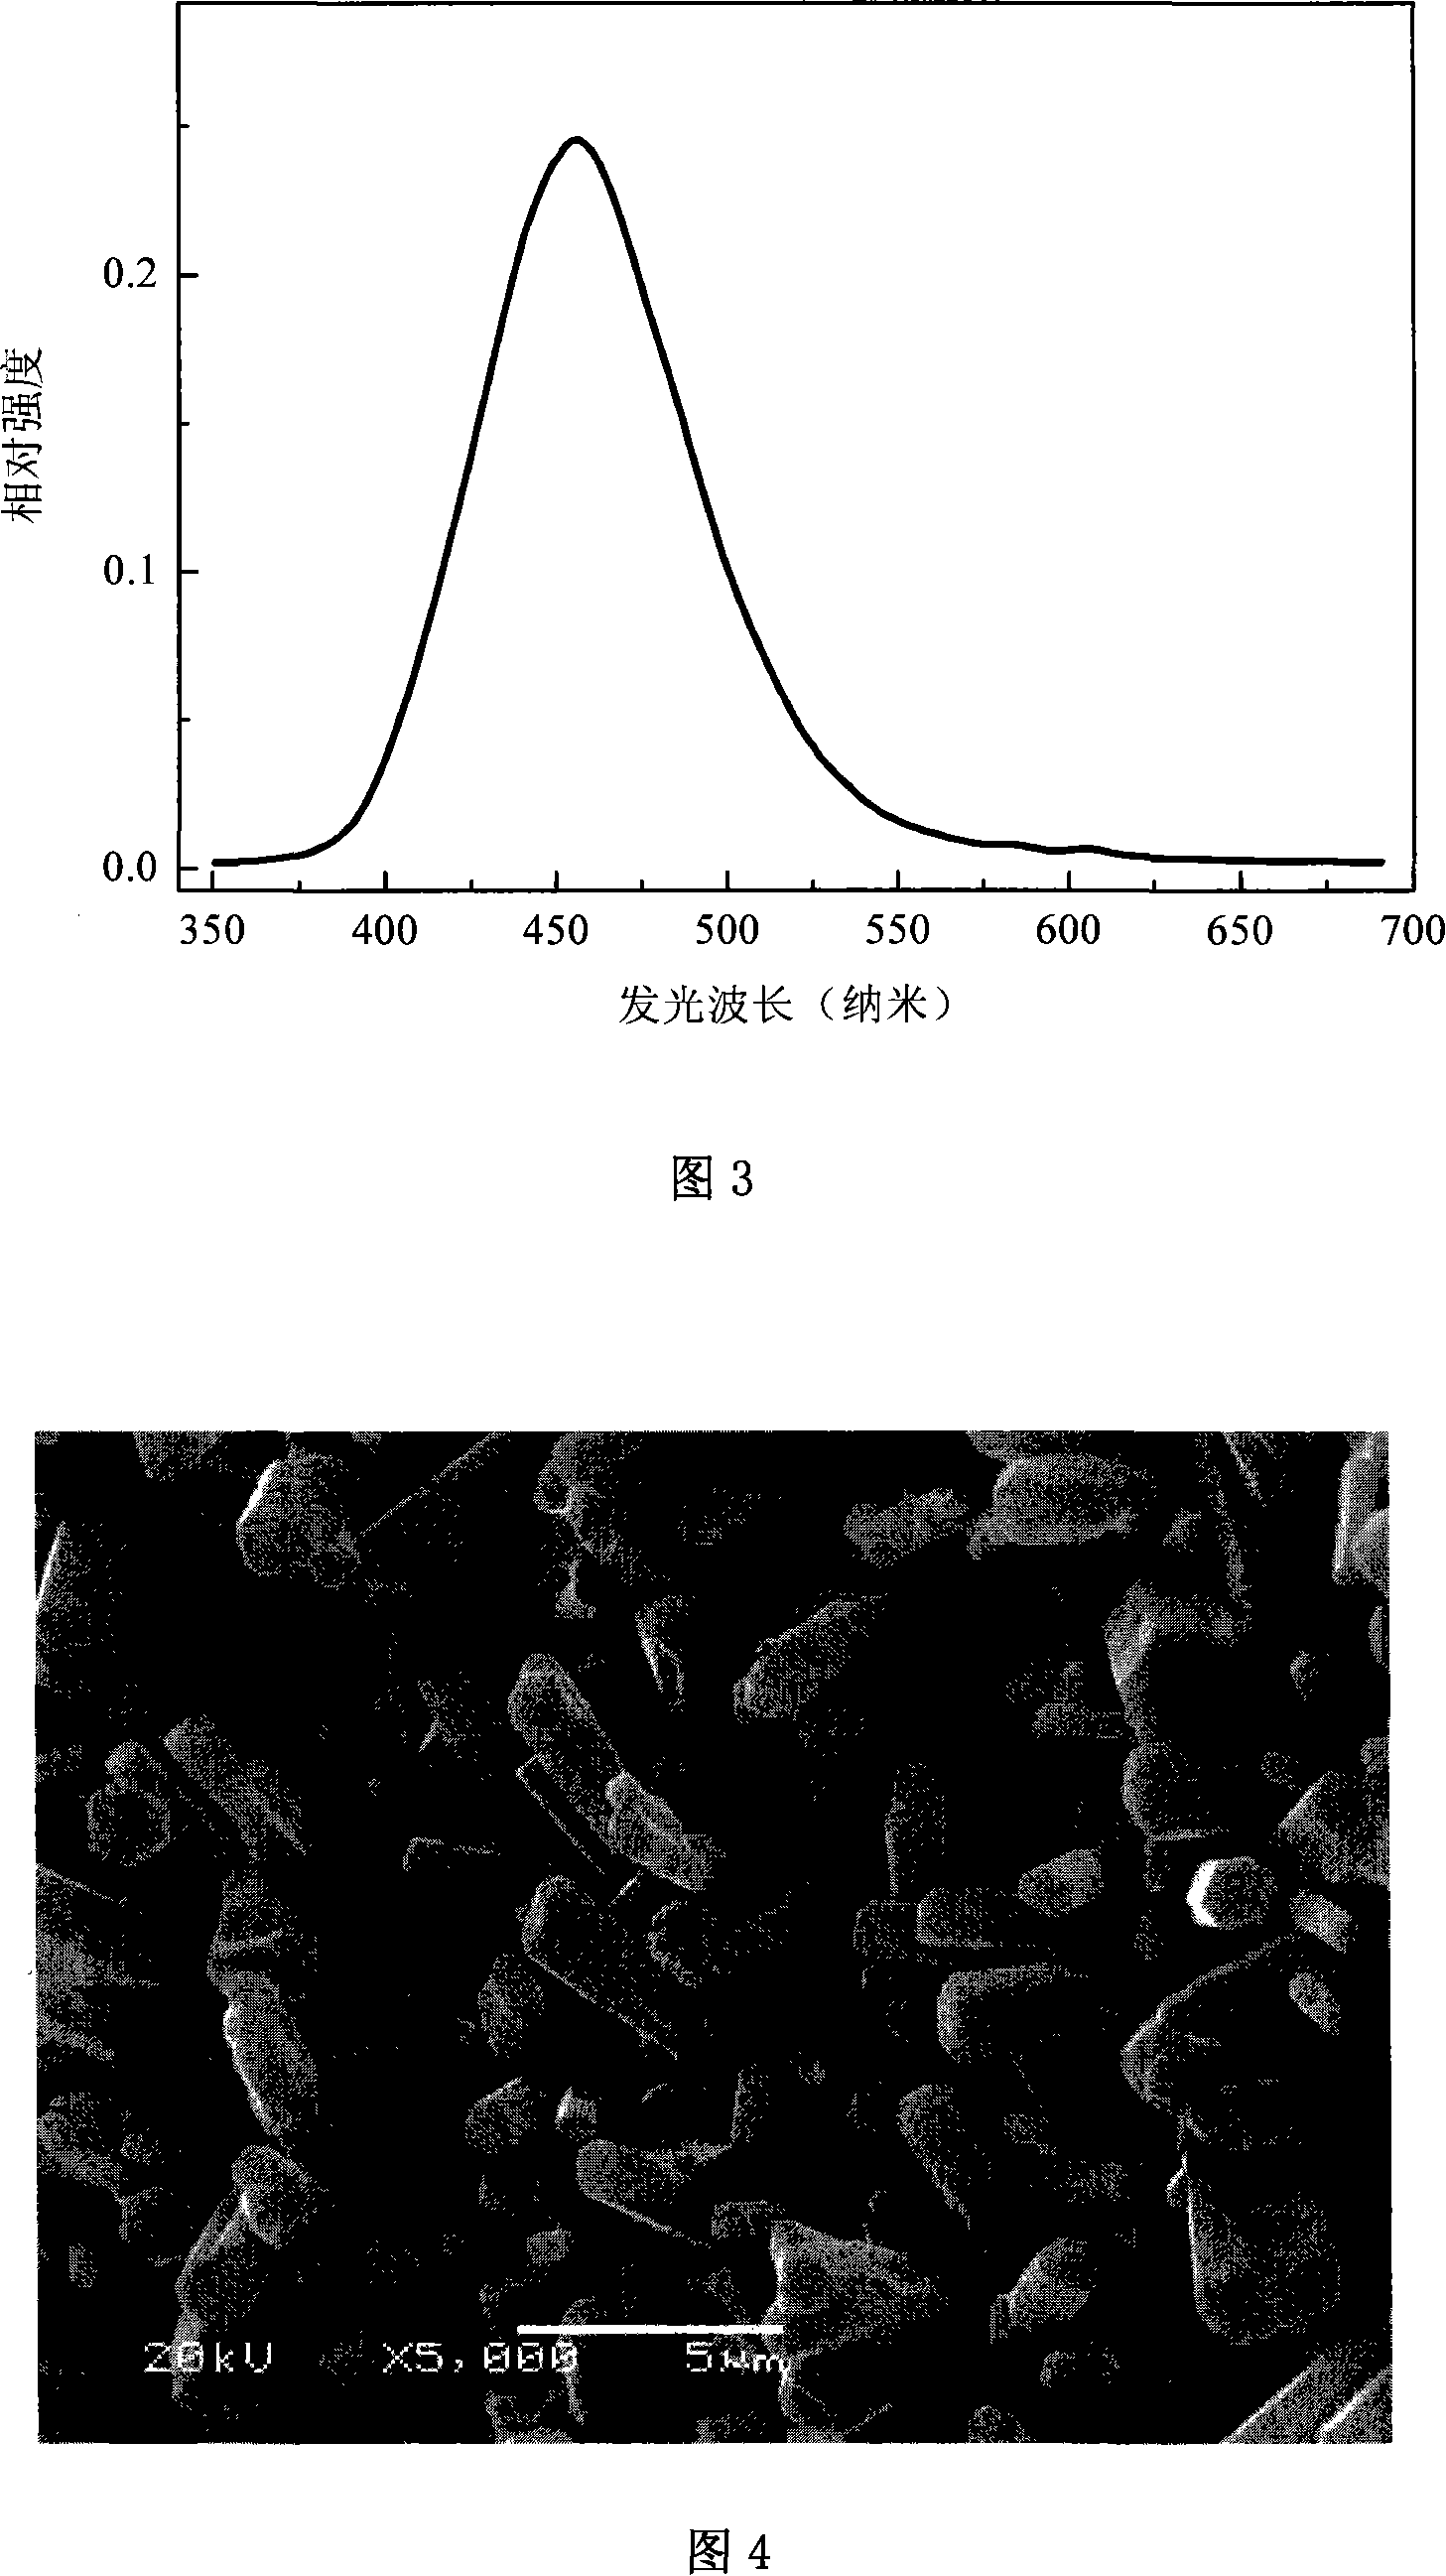 Blue-fluorescence luminescent material and method for making same